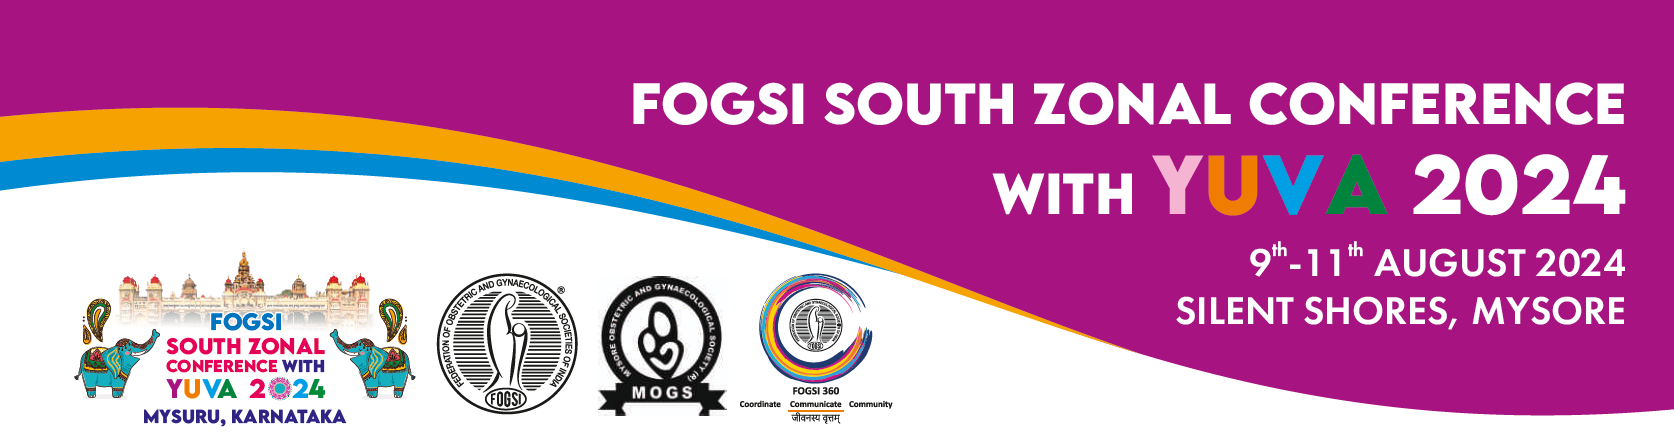 FOGSI SOUTH ZONAL CONFERENCE WITH YUVA 2024